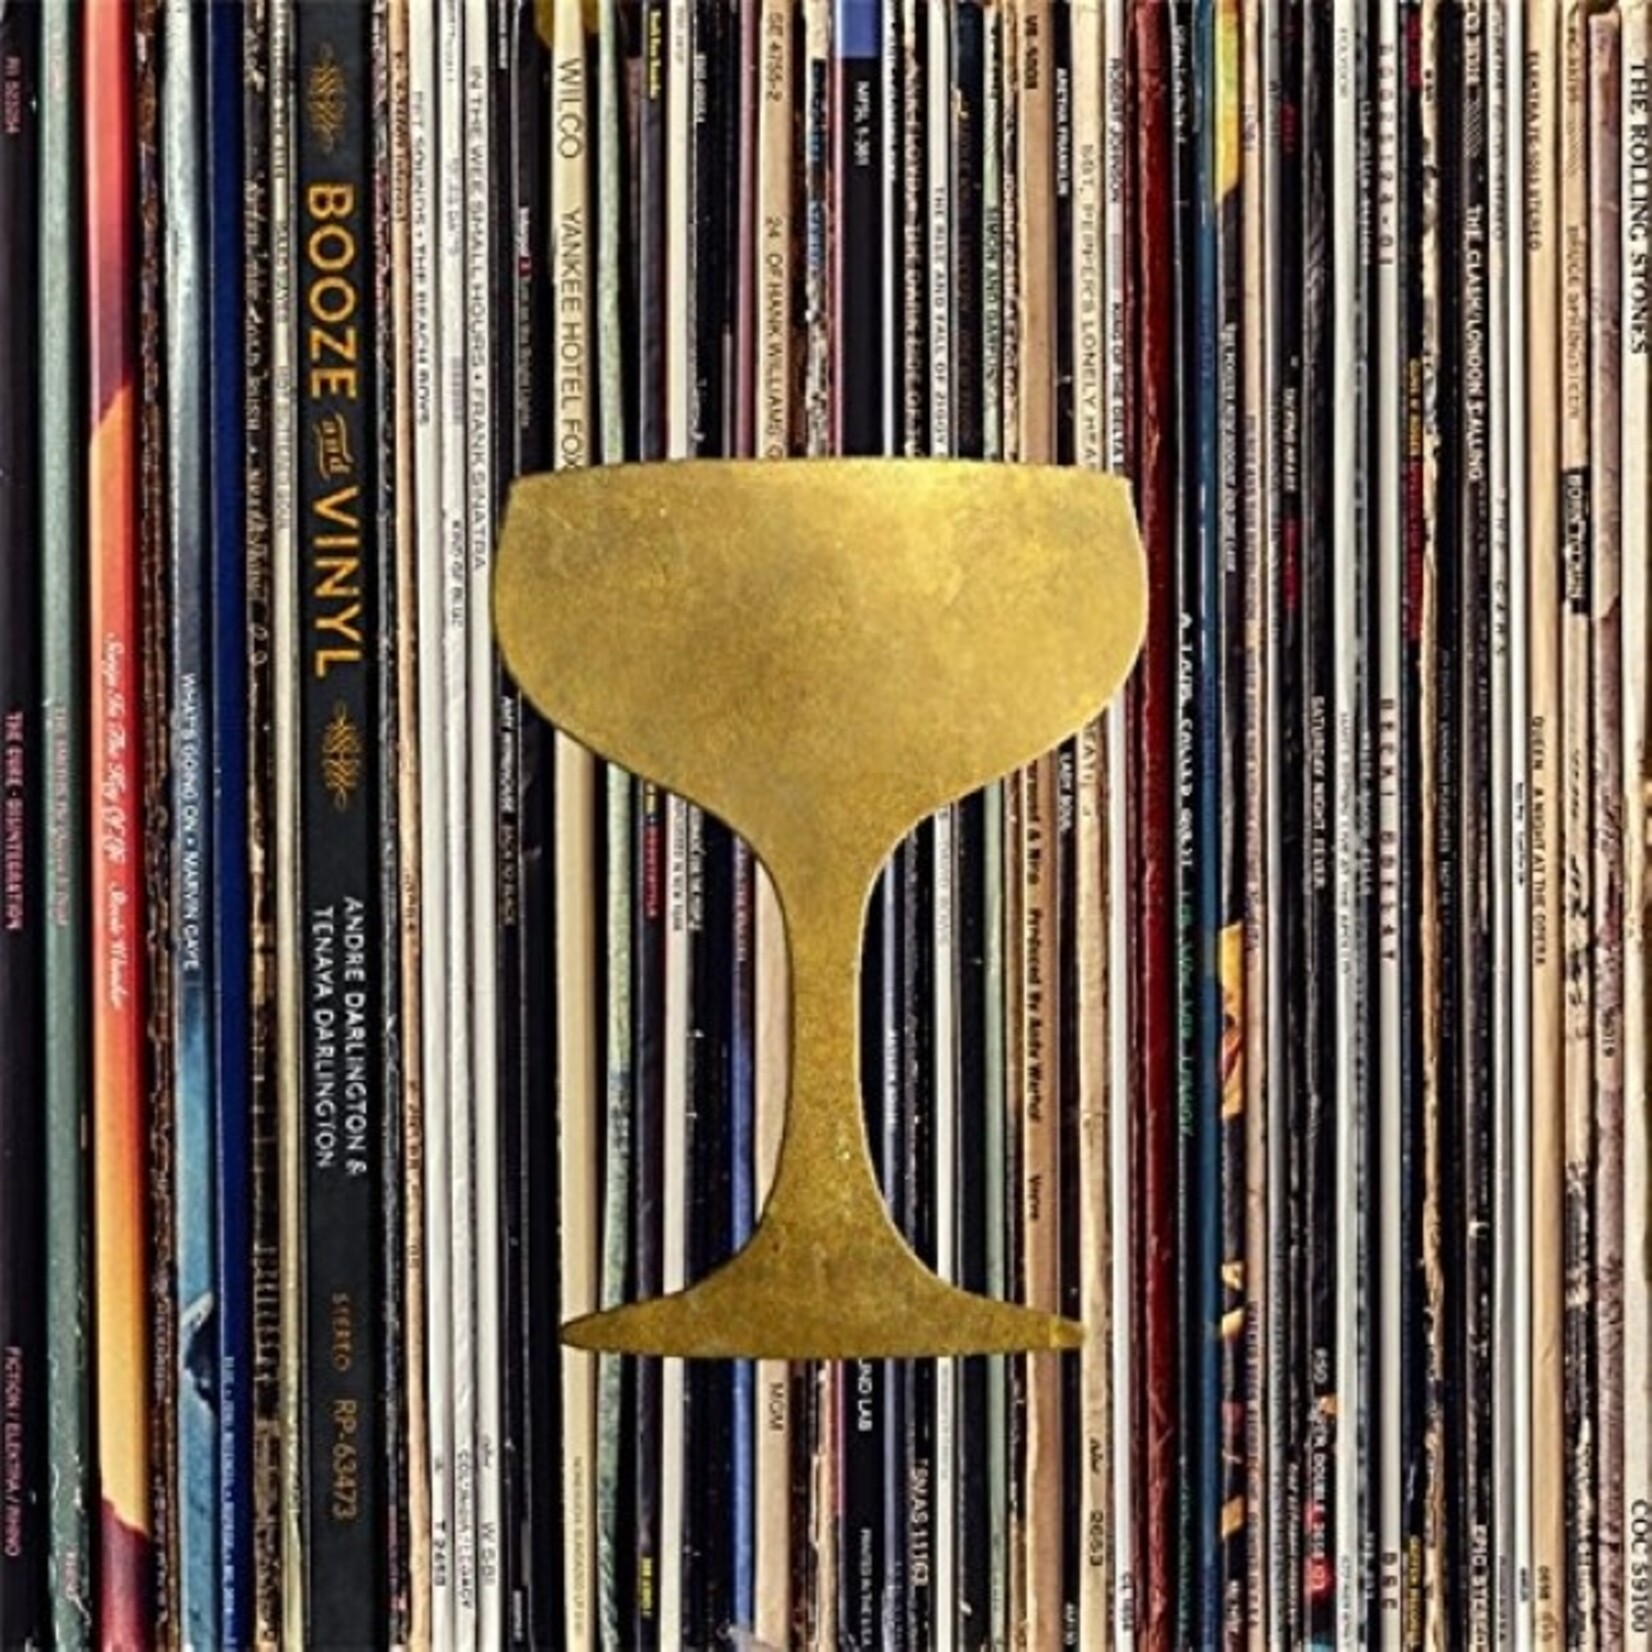 Booze and Vinyl:  A Spirited Guide to Great Music and Mixed Drinks